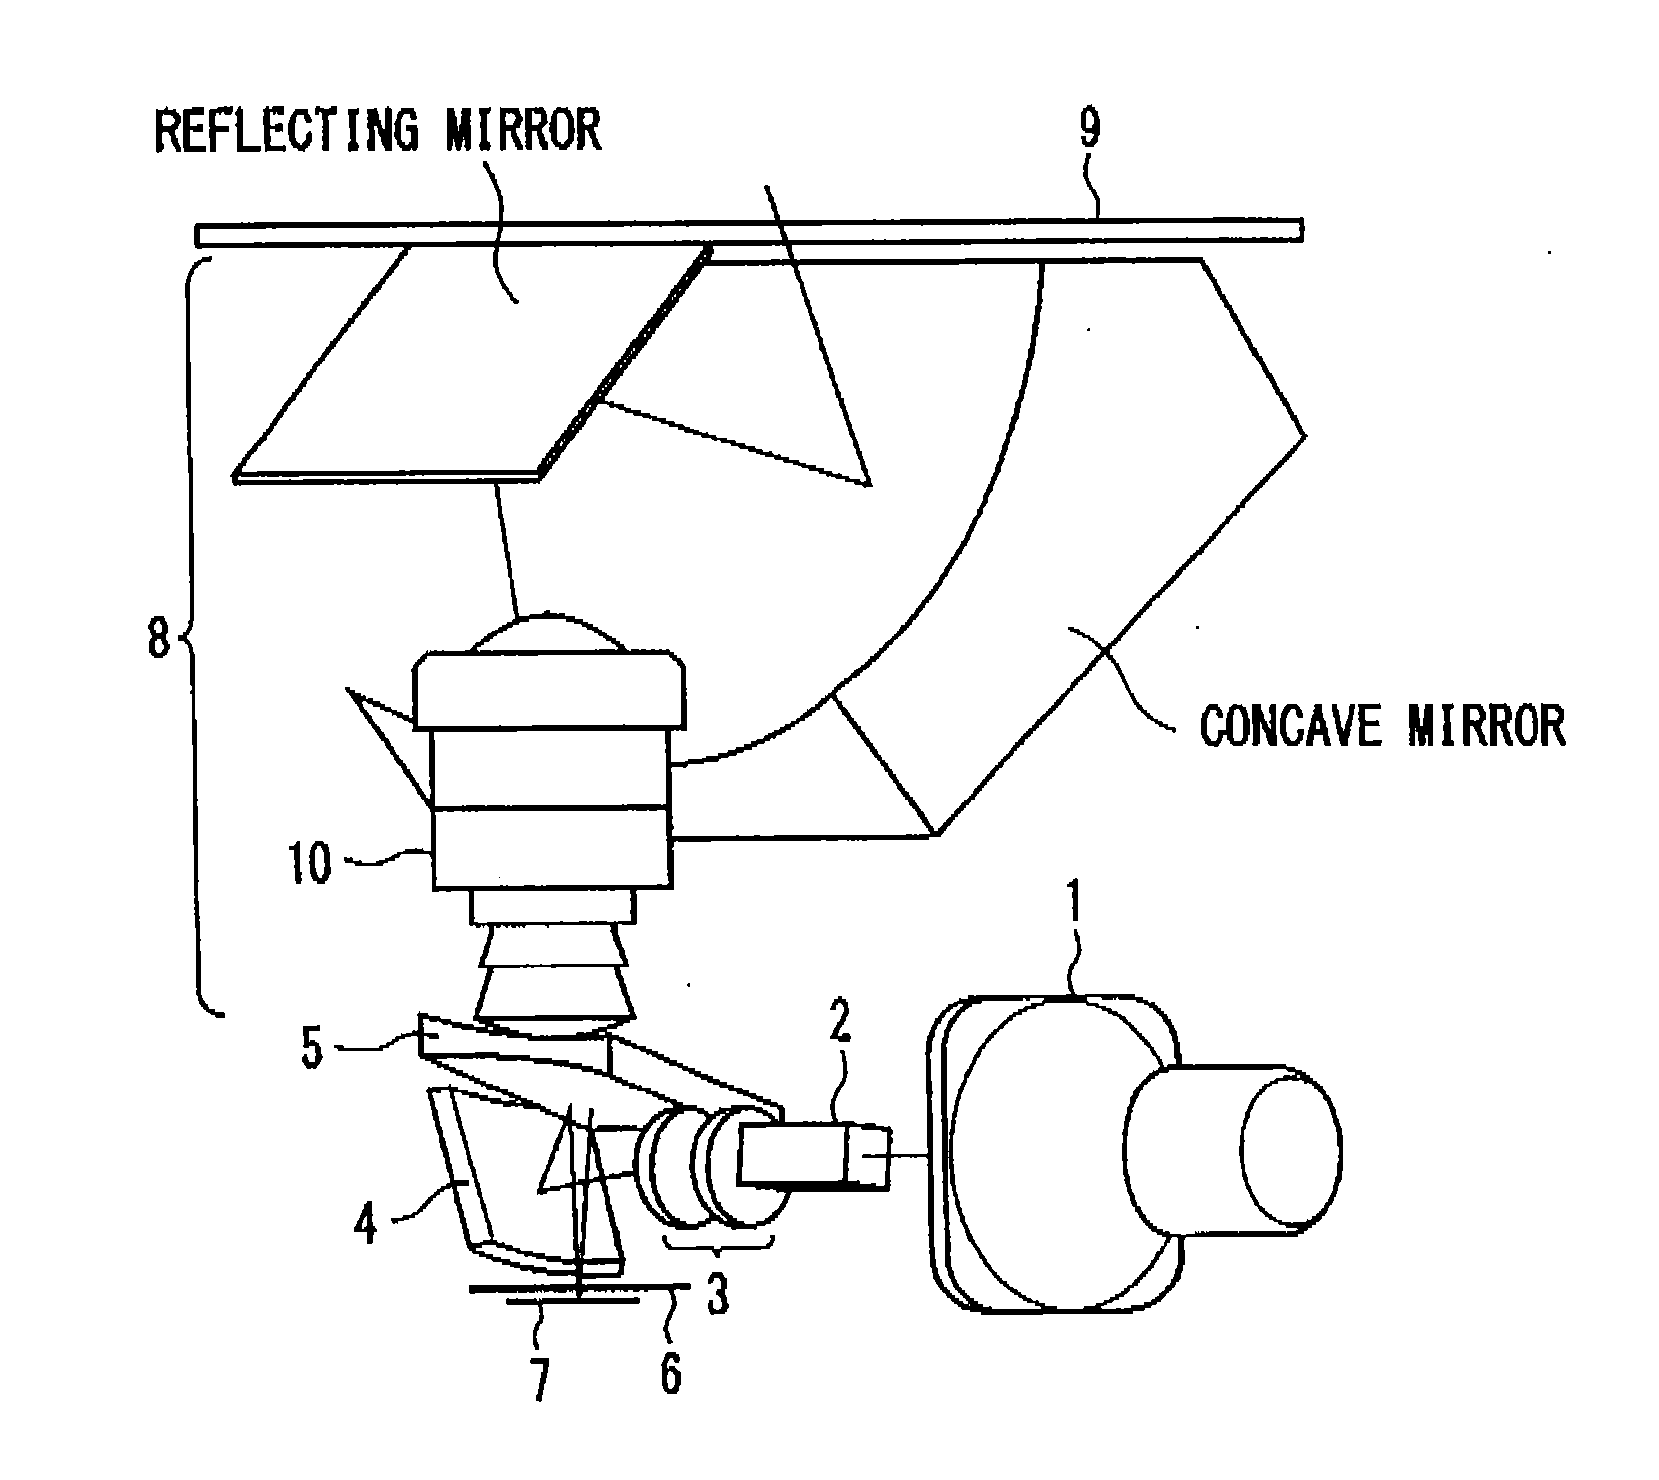 Magnification optical system